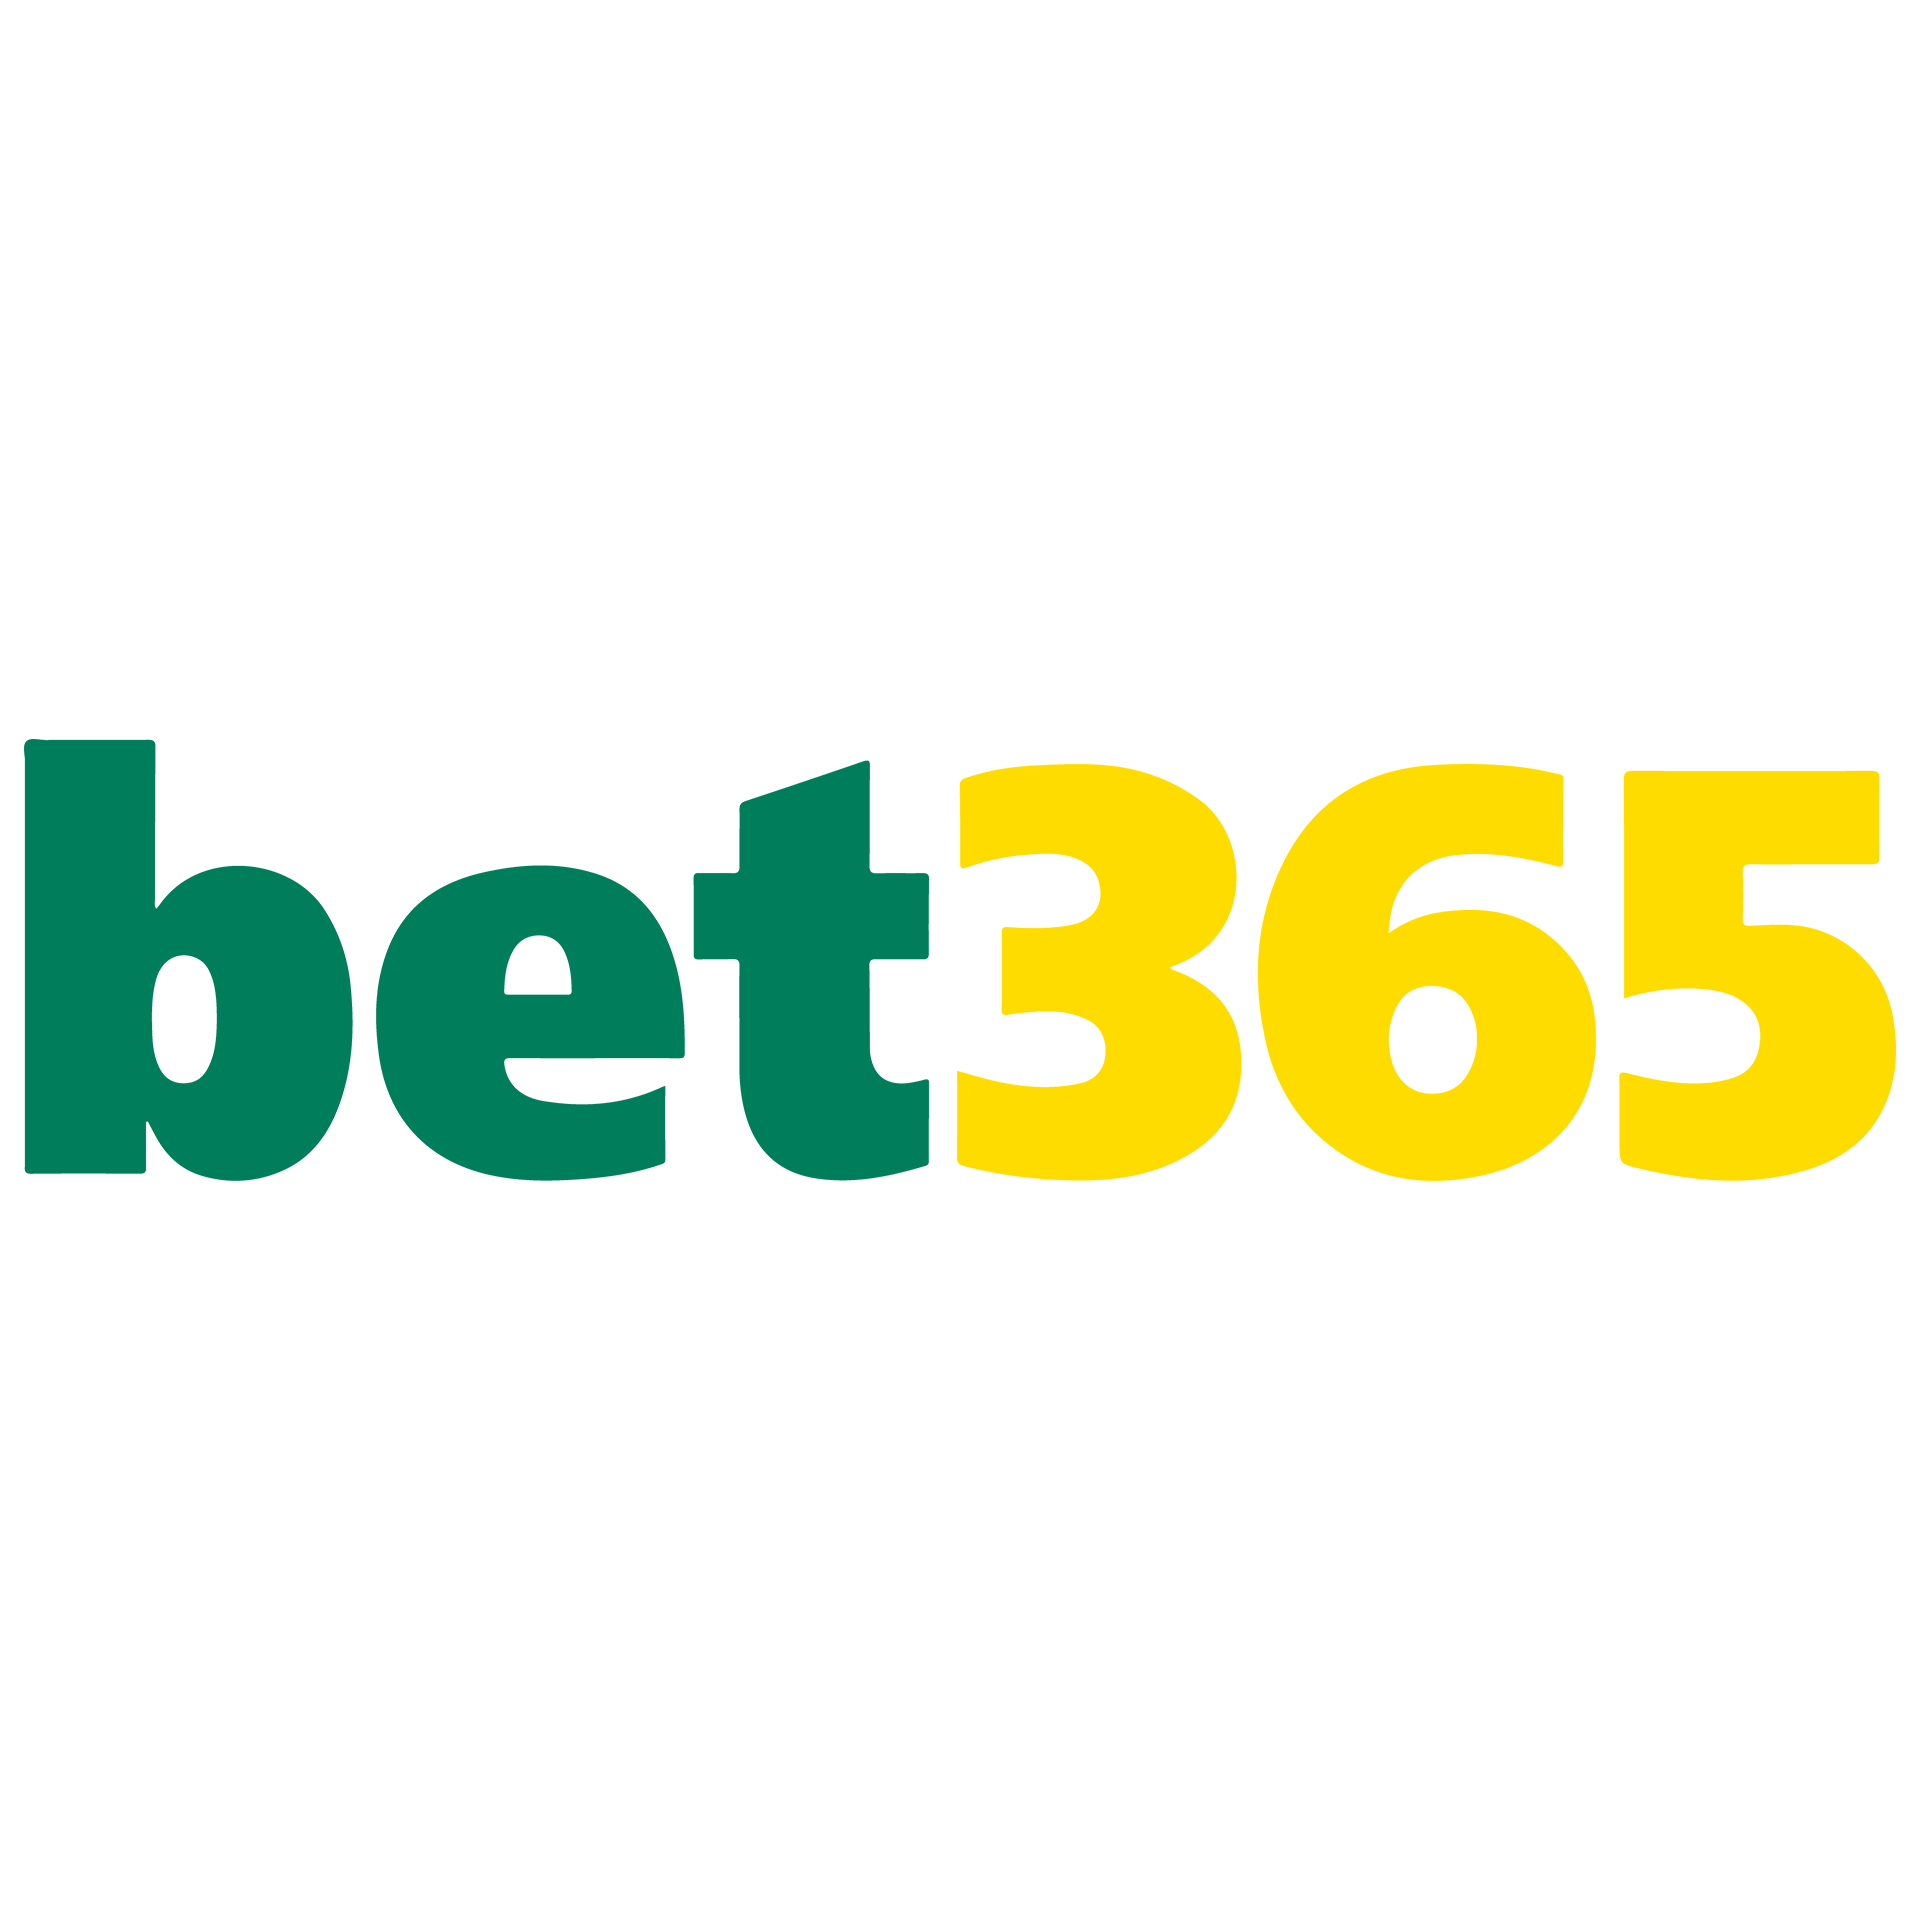 Among the top five most popular sites for betting is Bet365.